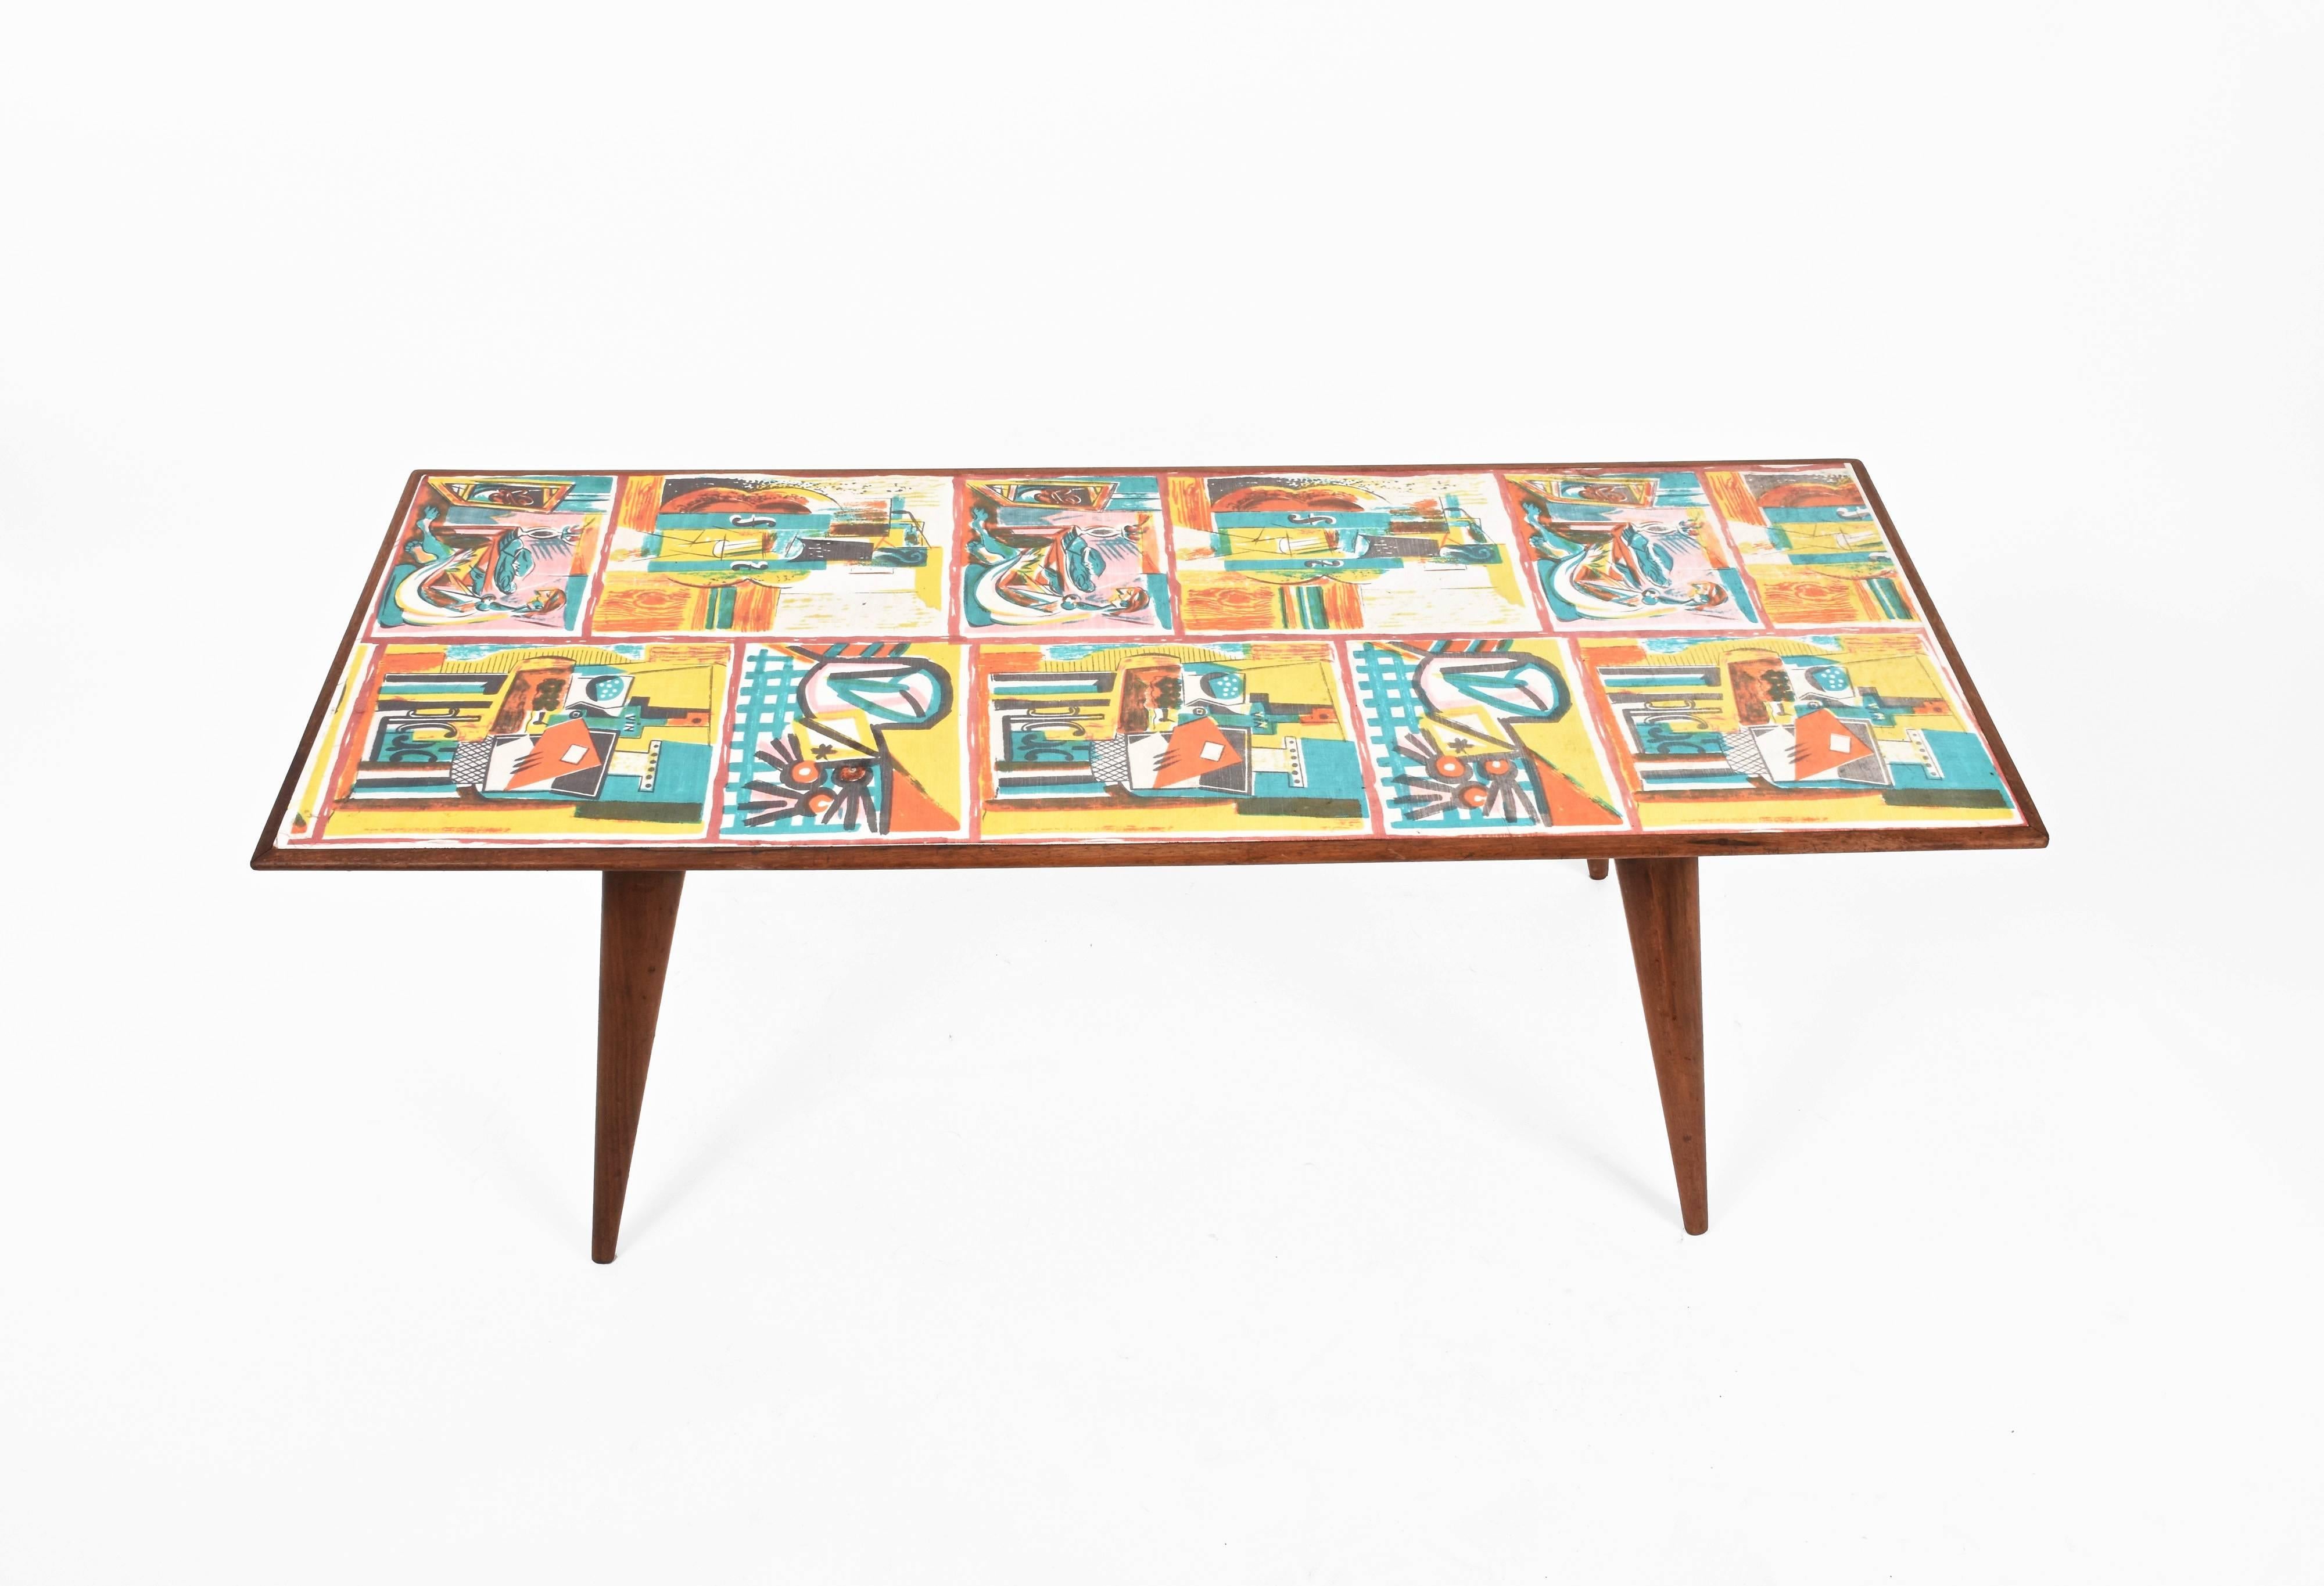 Midcentury Printed Wood and Plastic Italian Coffee Table after De Poli, 1950s For Sale 2